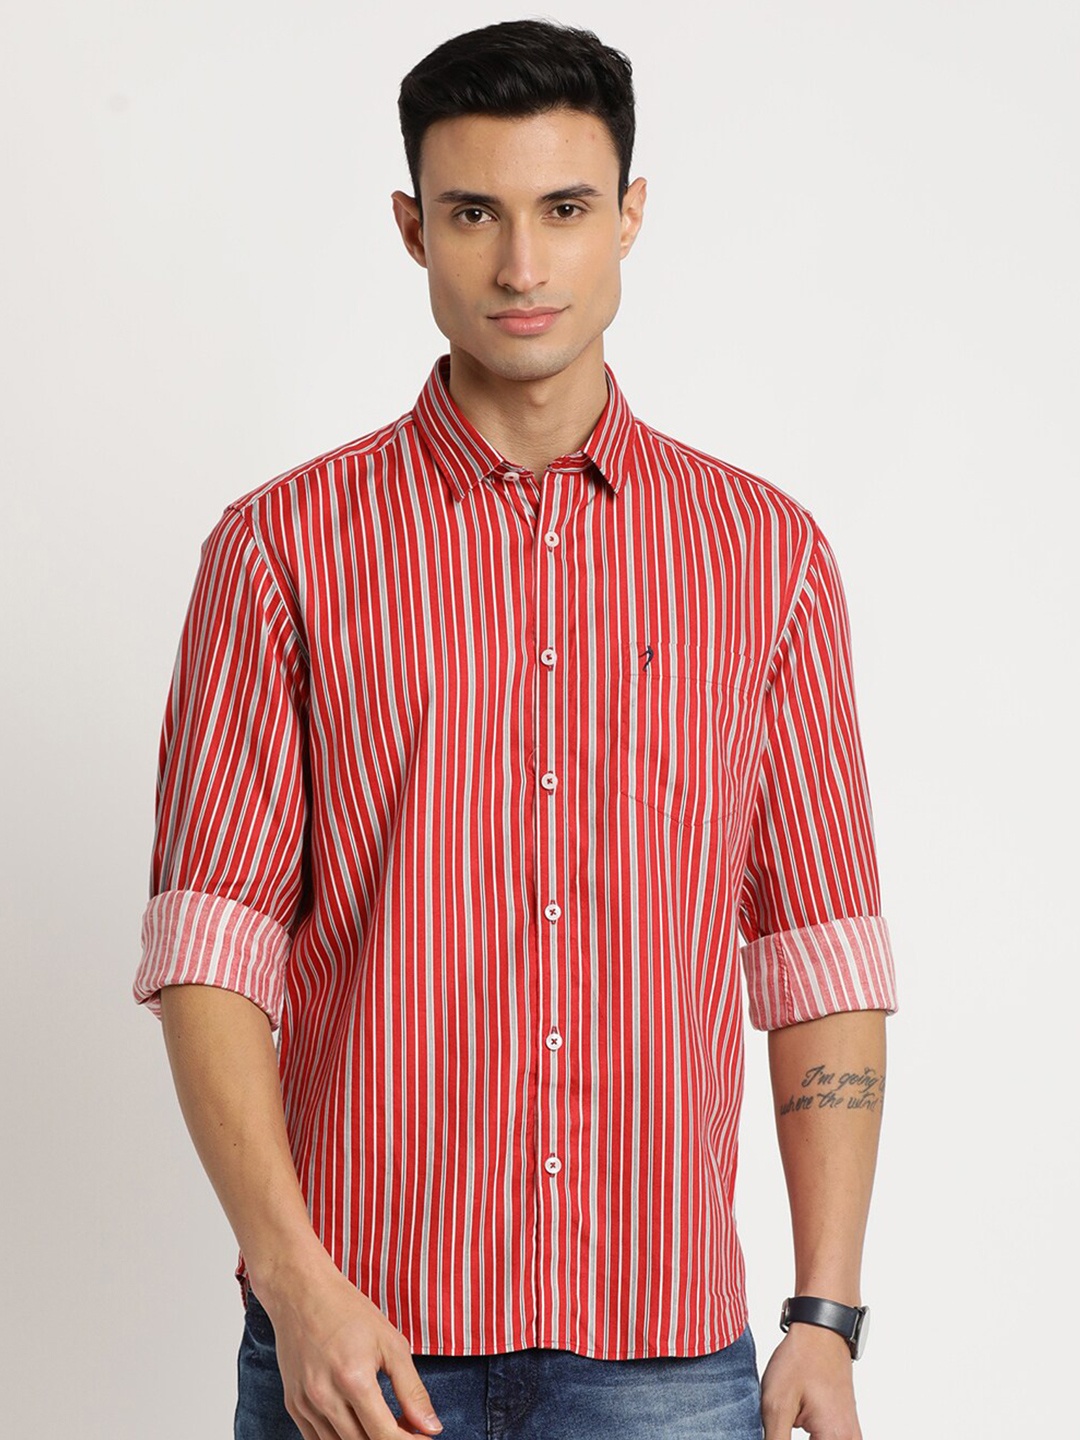 

Indian Terrain Men Chiseled Slim Fit Striped Casual Cotton Shirt, Red